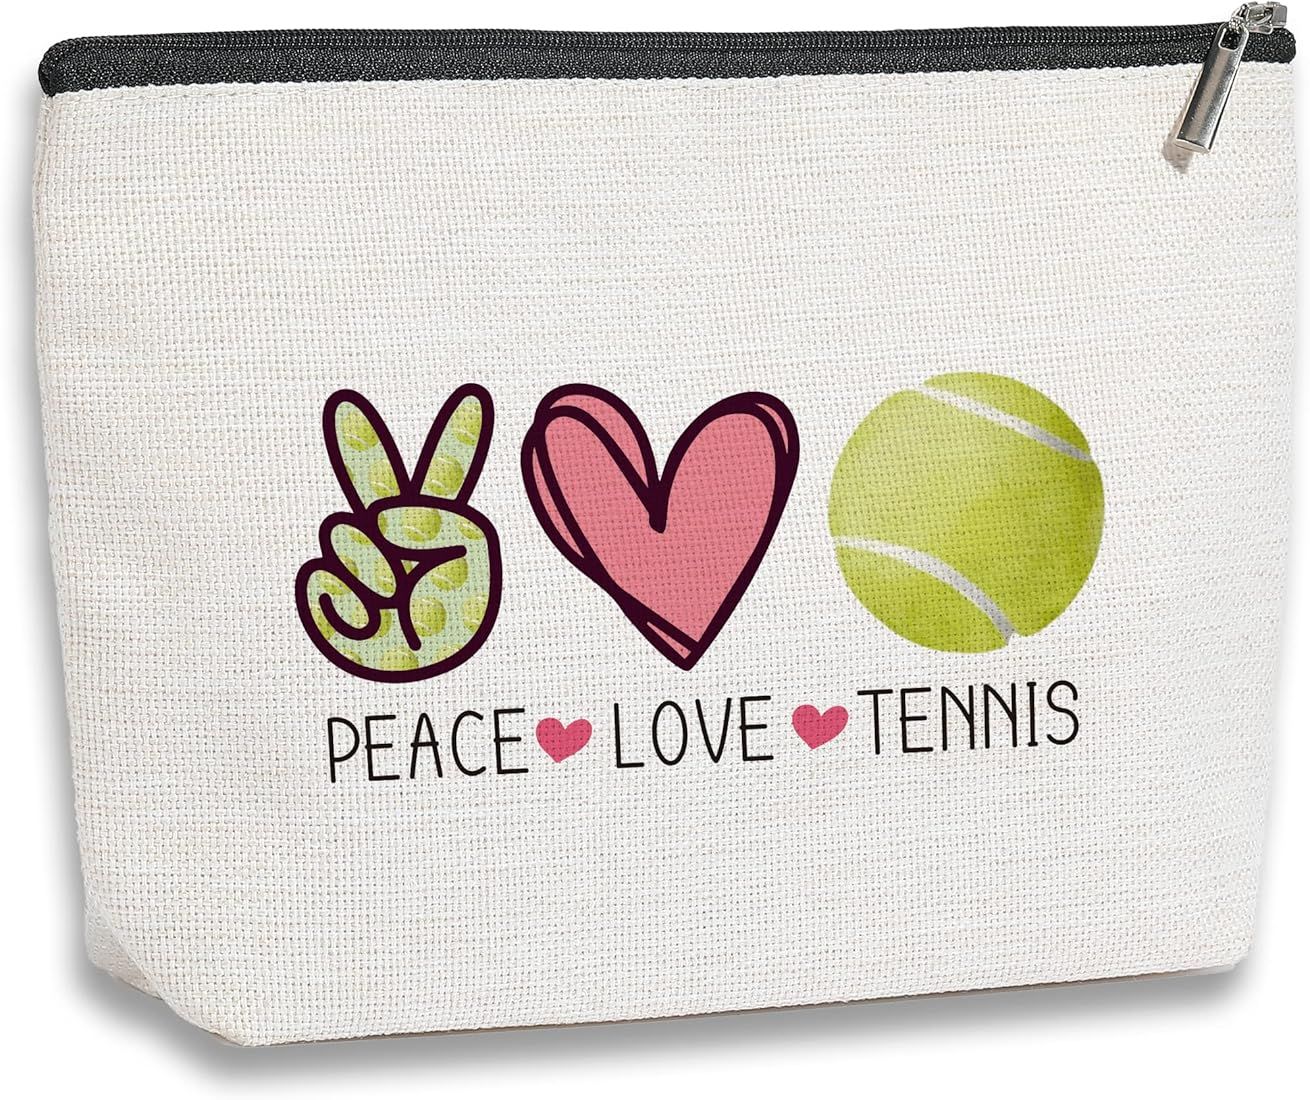 Tennis Gifts Tennis Pouch Bag Inspirational Gifts for Women Tennis Gifts for Girls, Gifts for Tennis | Amazon (US)